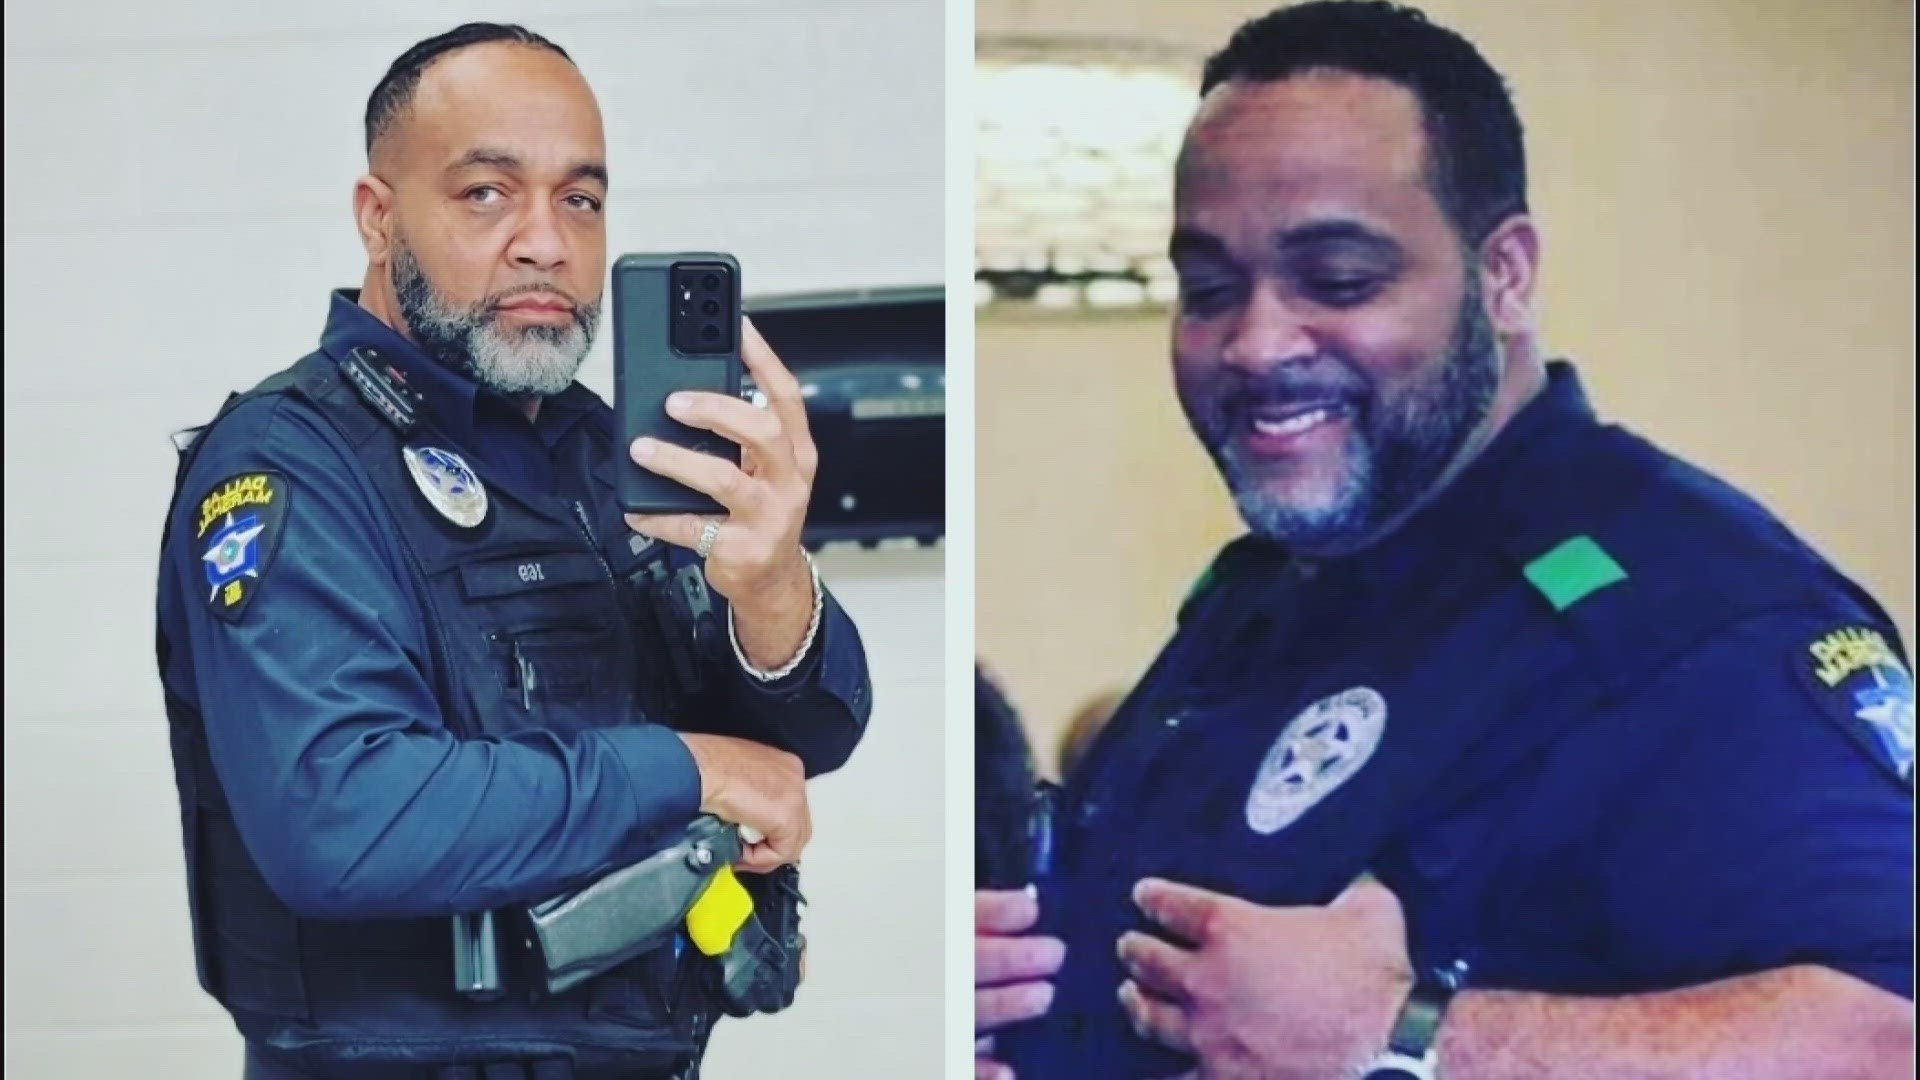 He's been an officer for 17 years with the Dallas Marshal's Office. The former college football player says he was fit when joined the force.